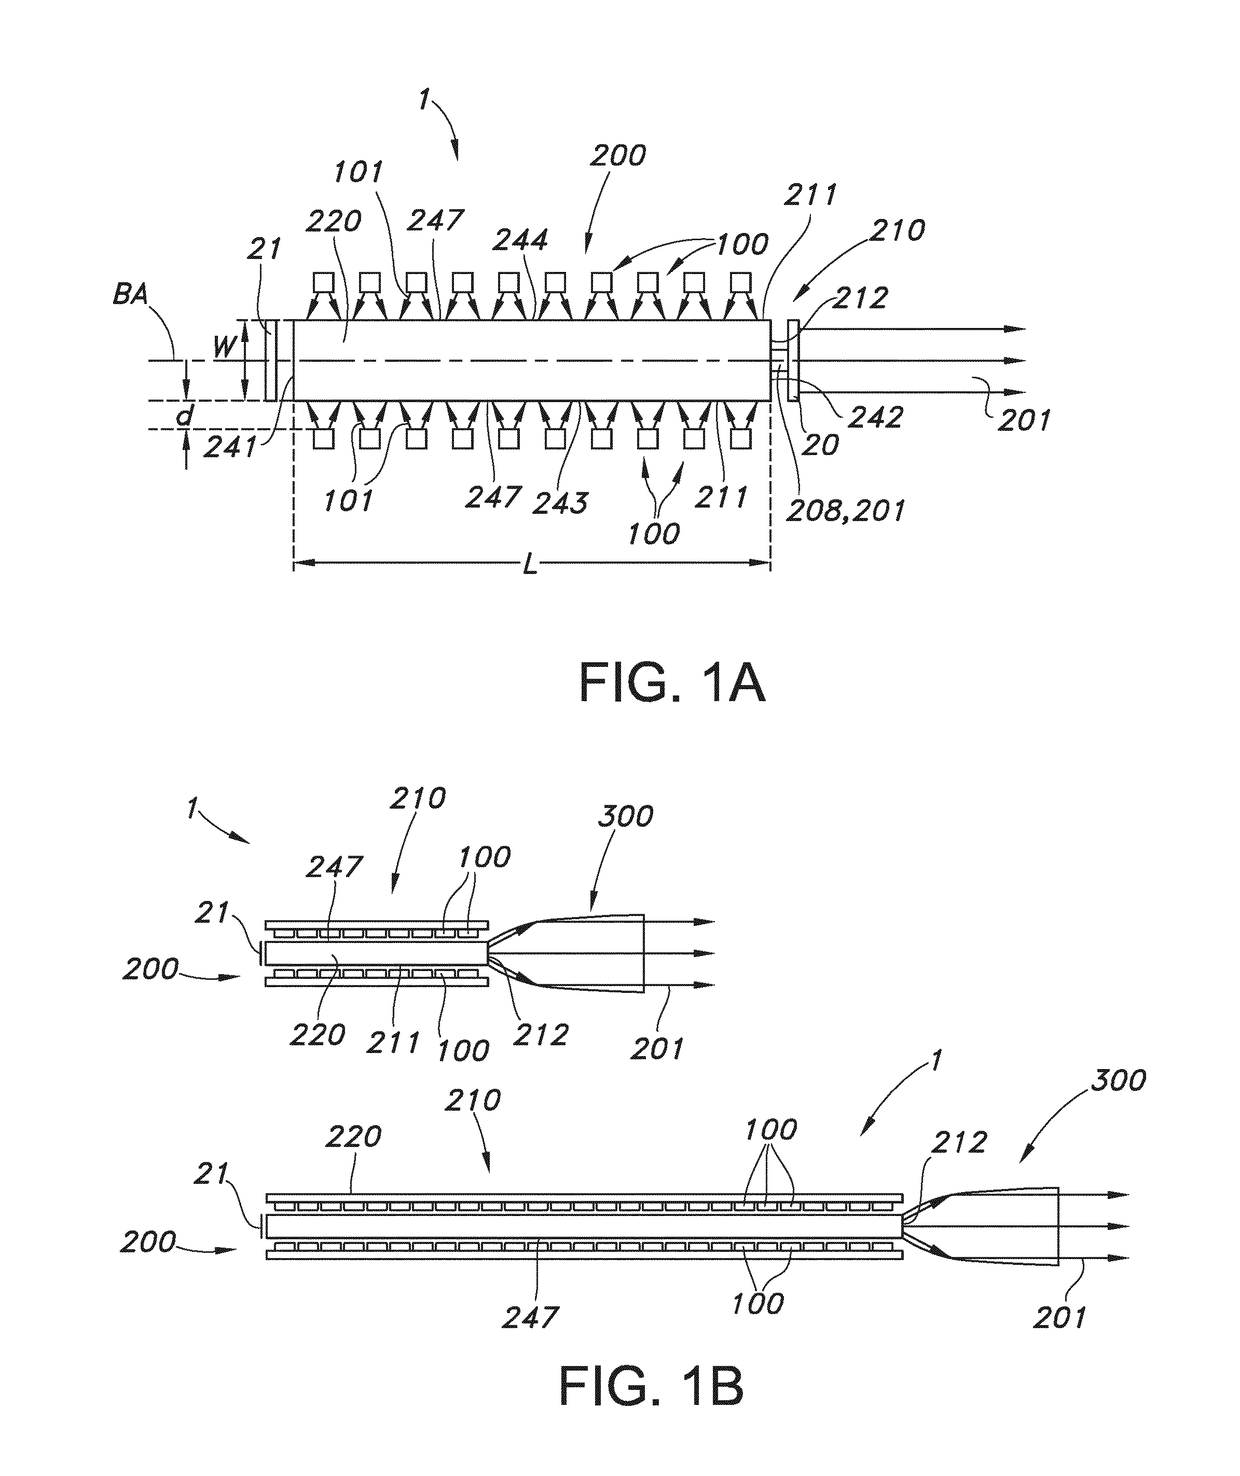 Compound parabolic collimator array for high intensity lighting